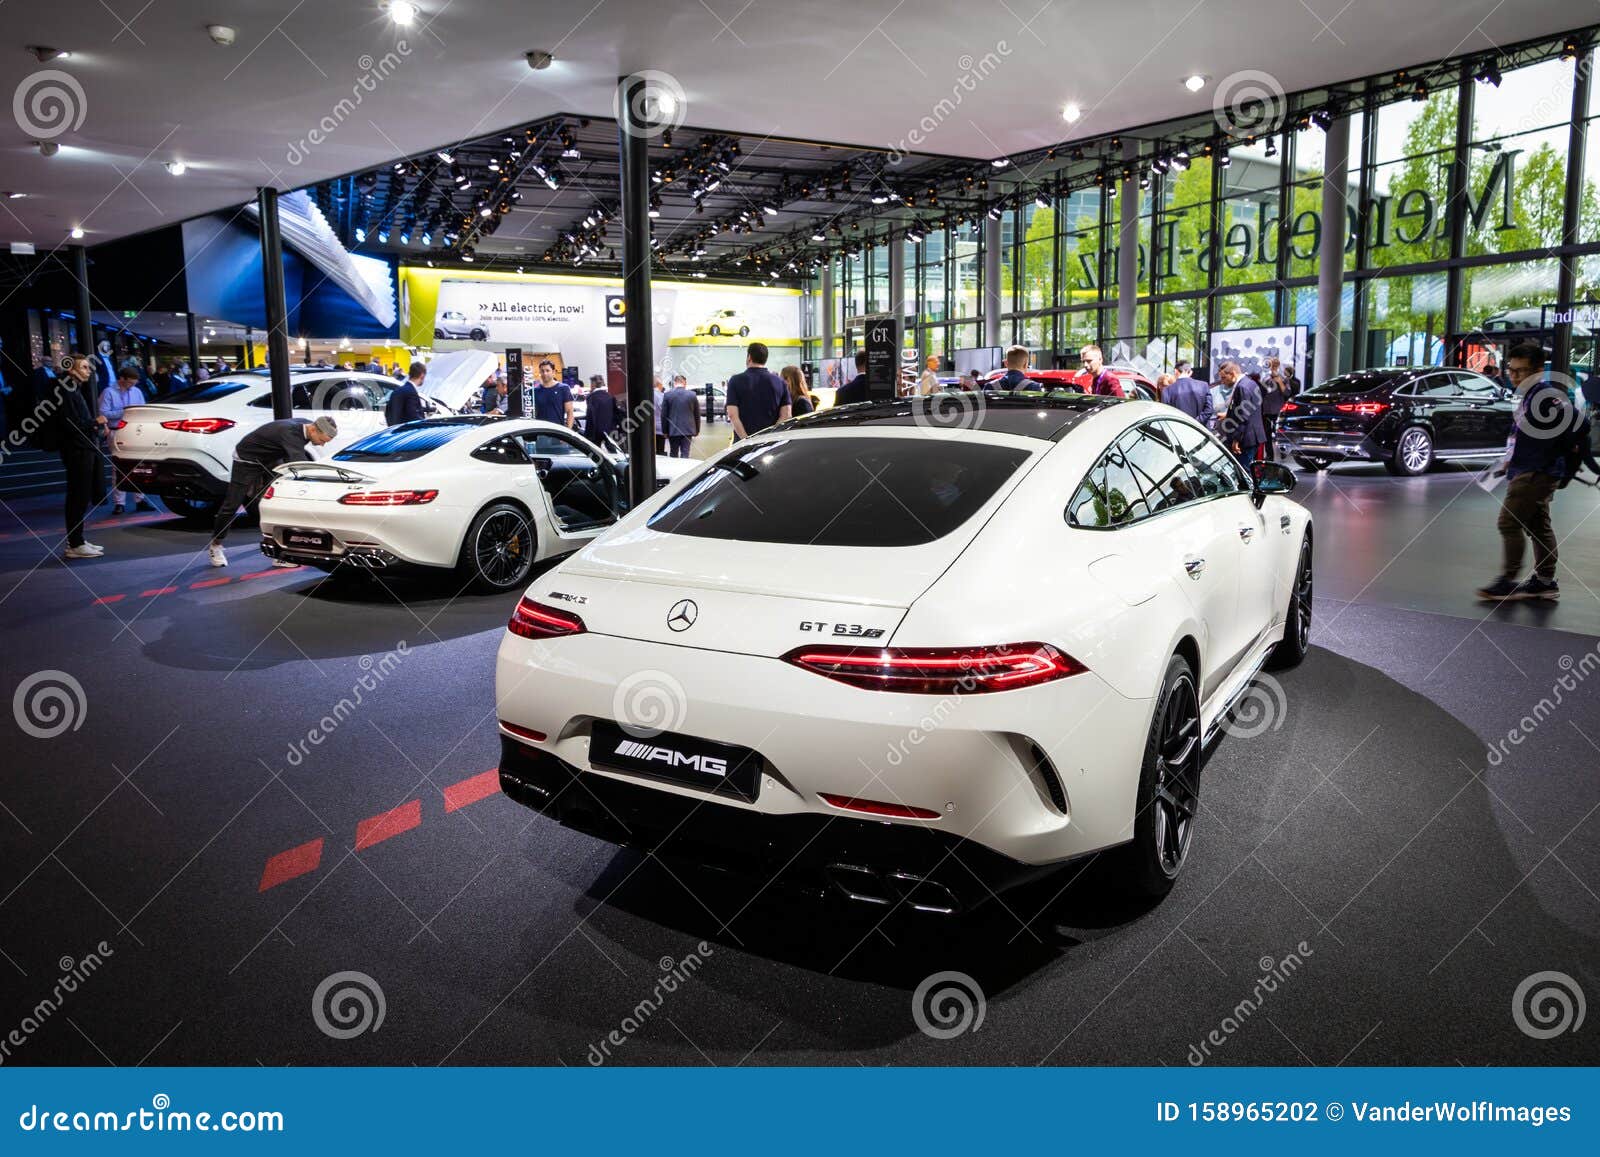 Mercedes Benz Amg Gt 63 S 4 Door Coupe 4matic Sports Car Editorial Photography Image Of Auto Fast